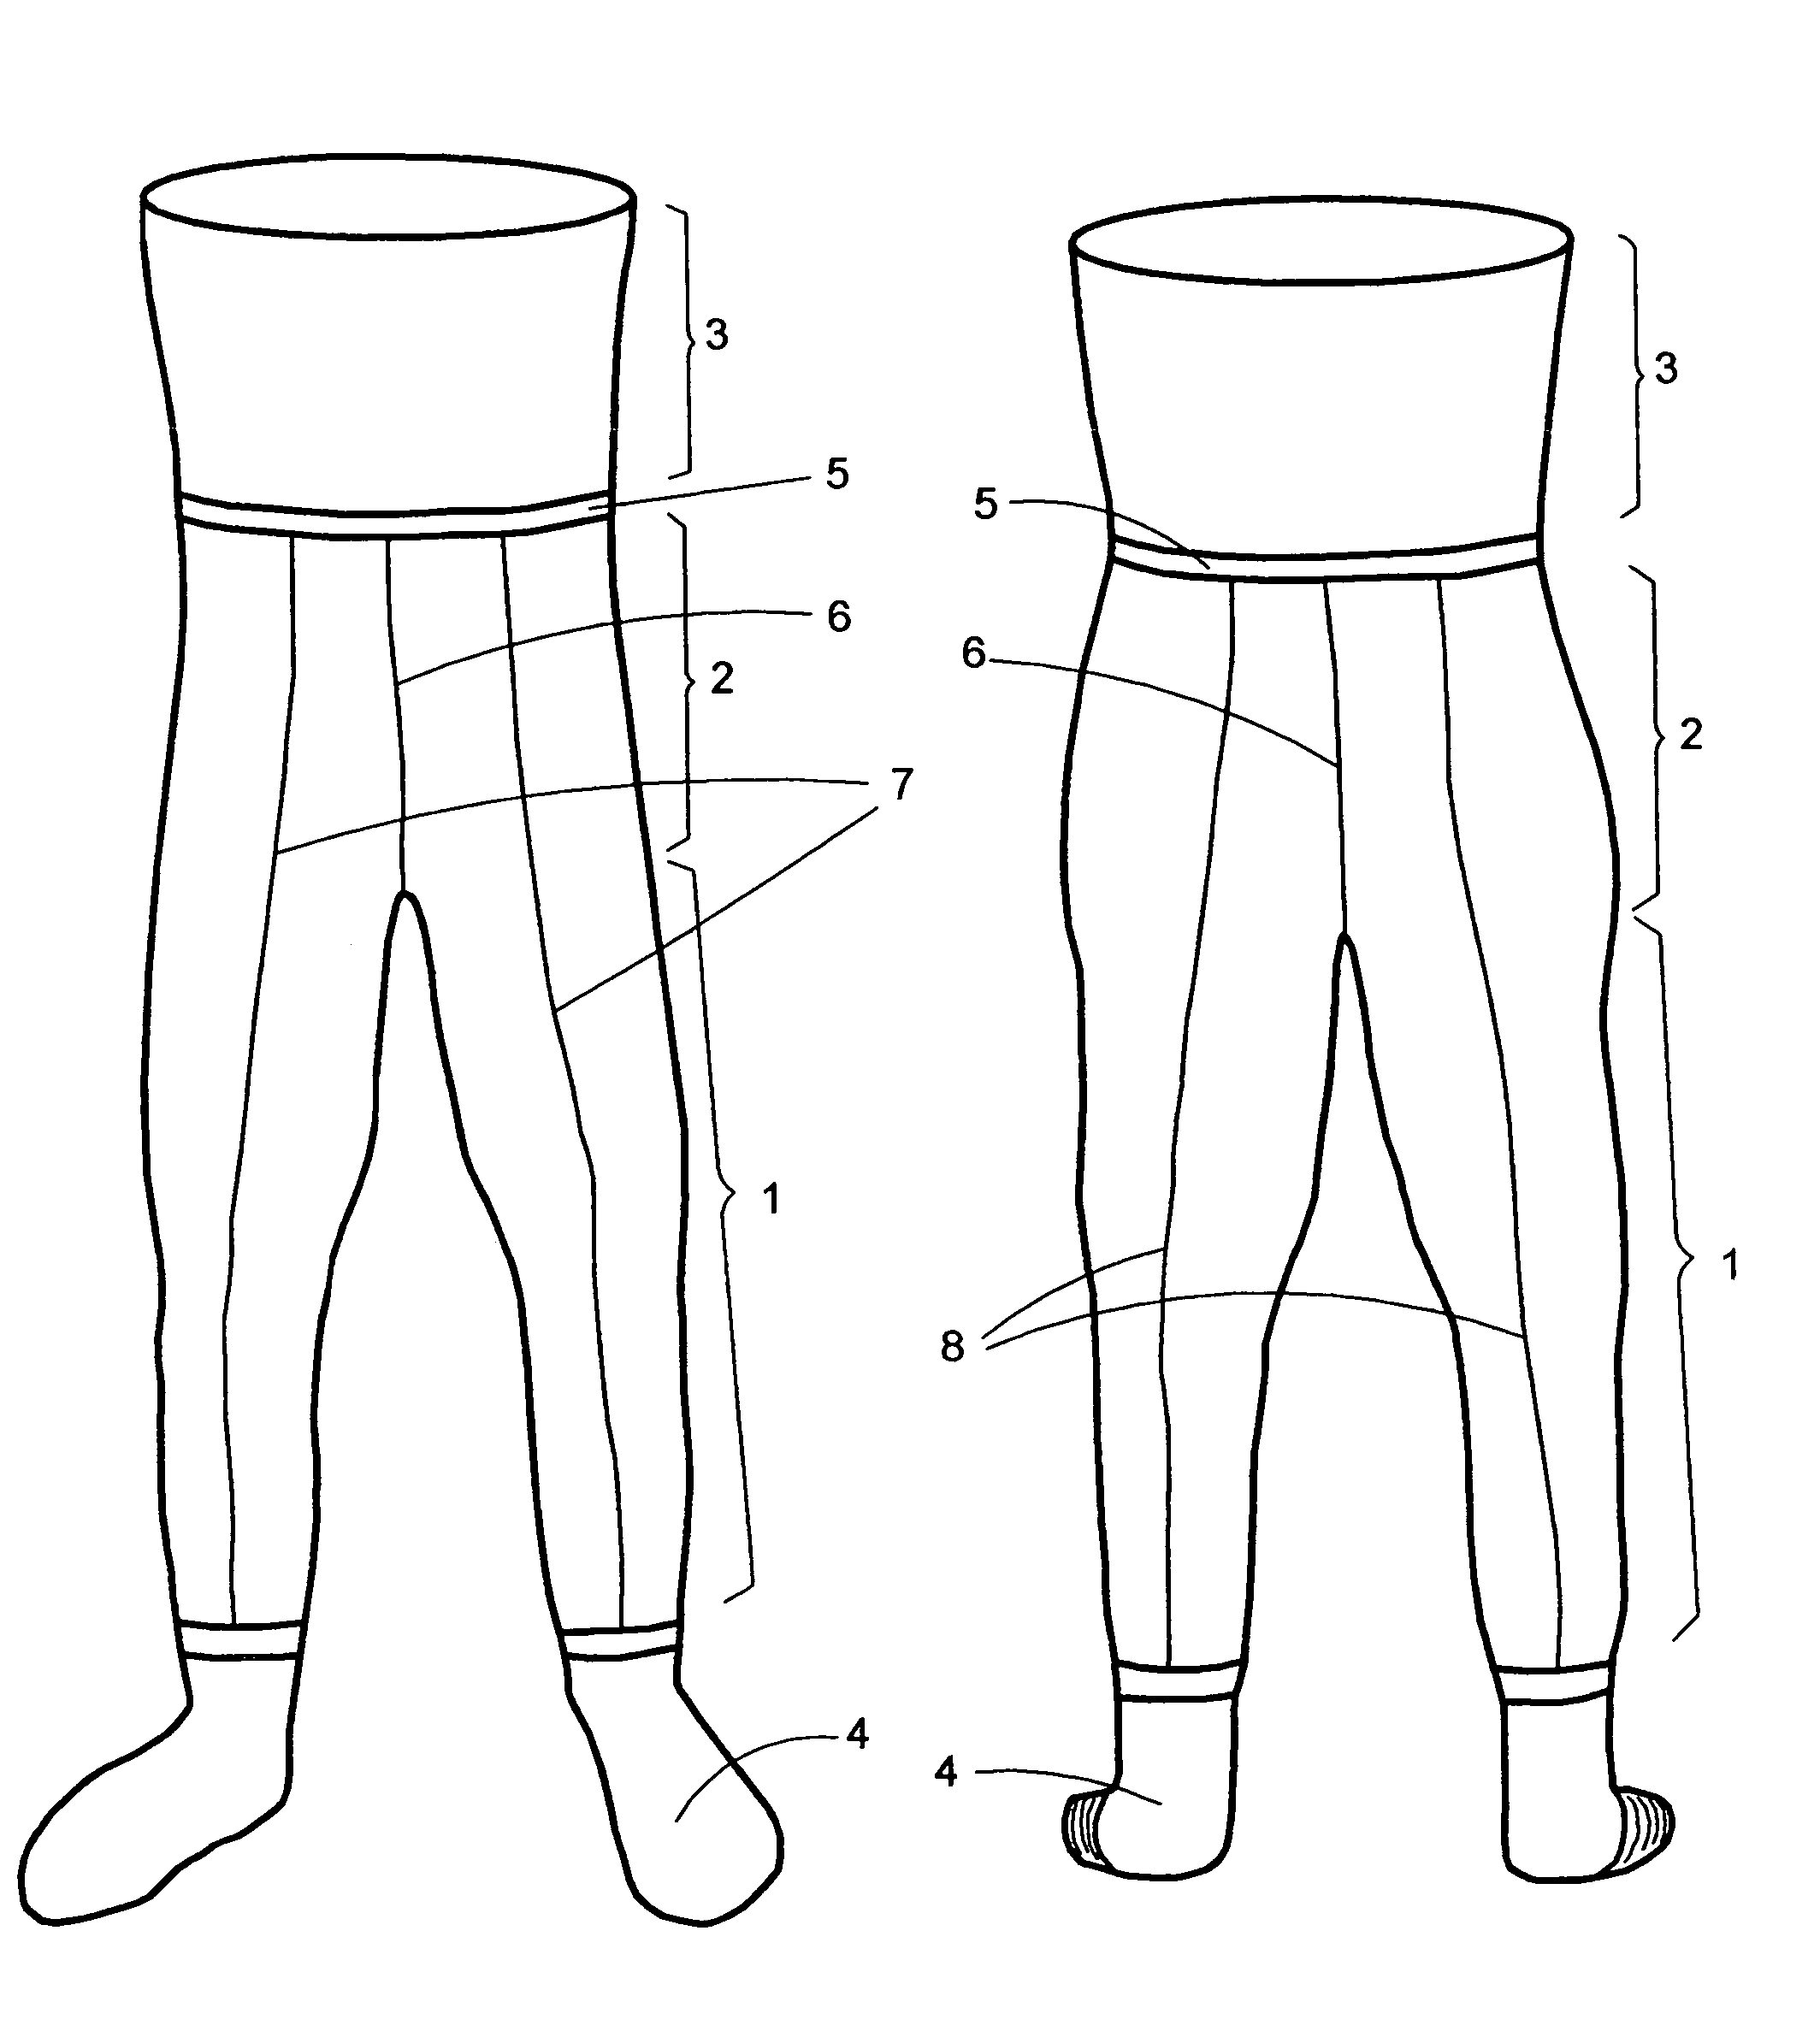 Pre-curved wader with front and back seams